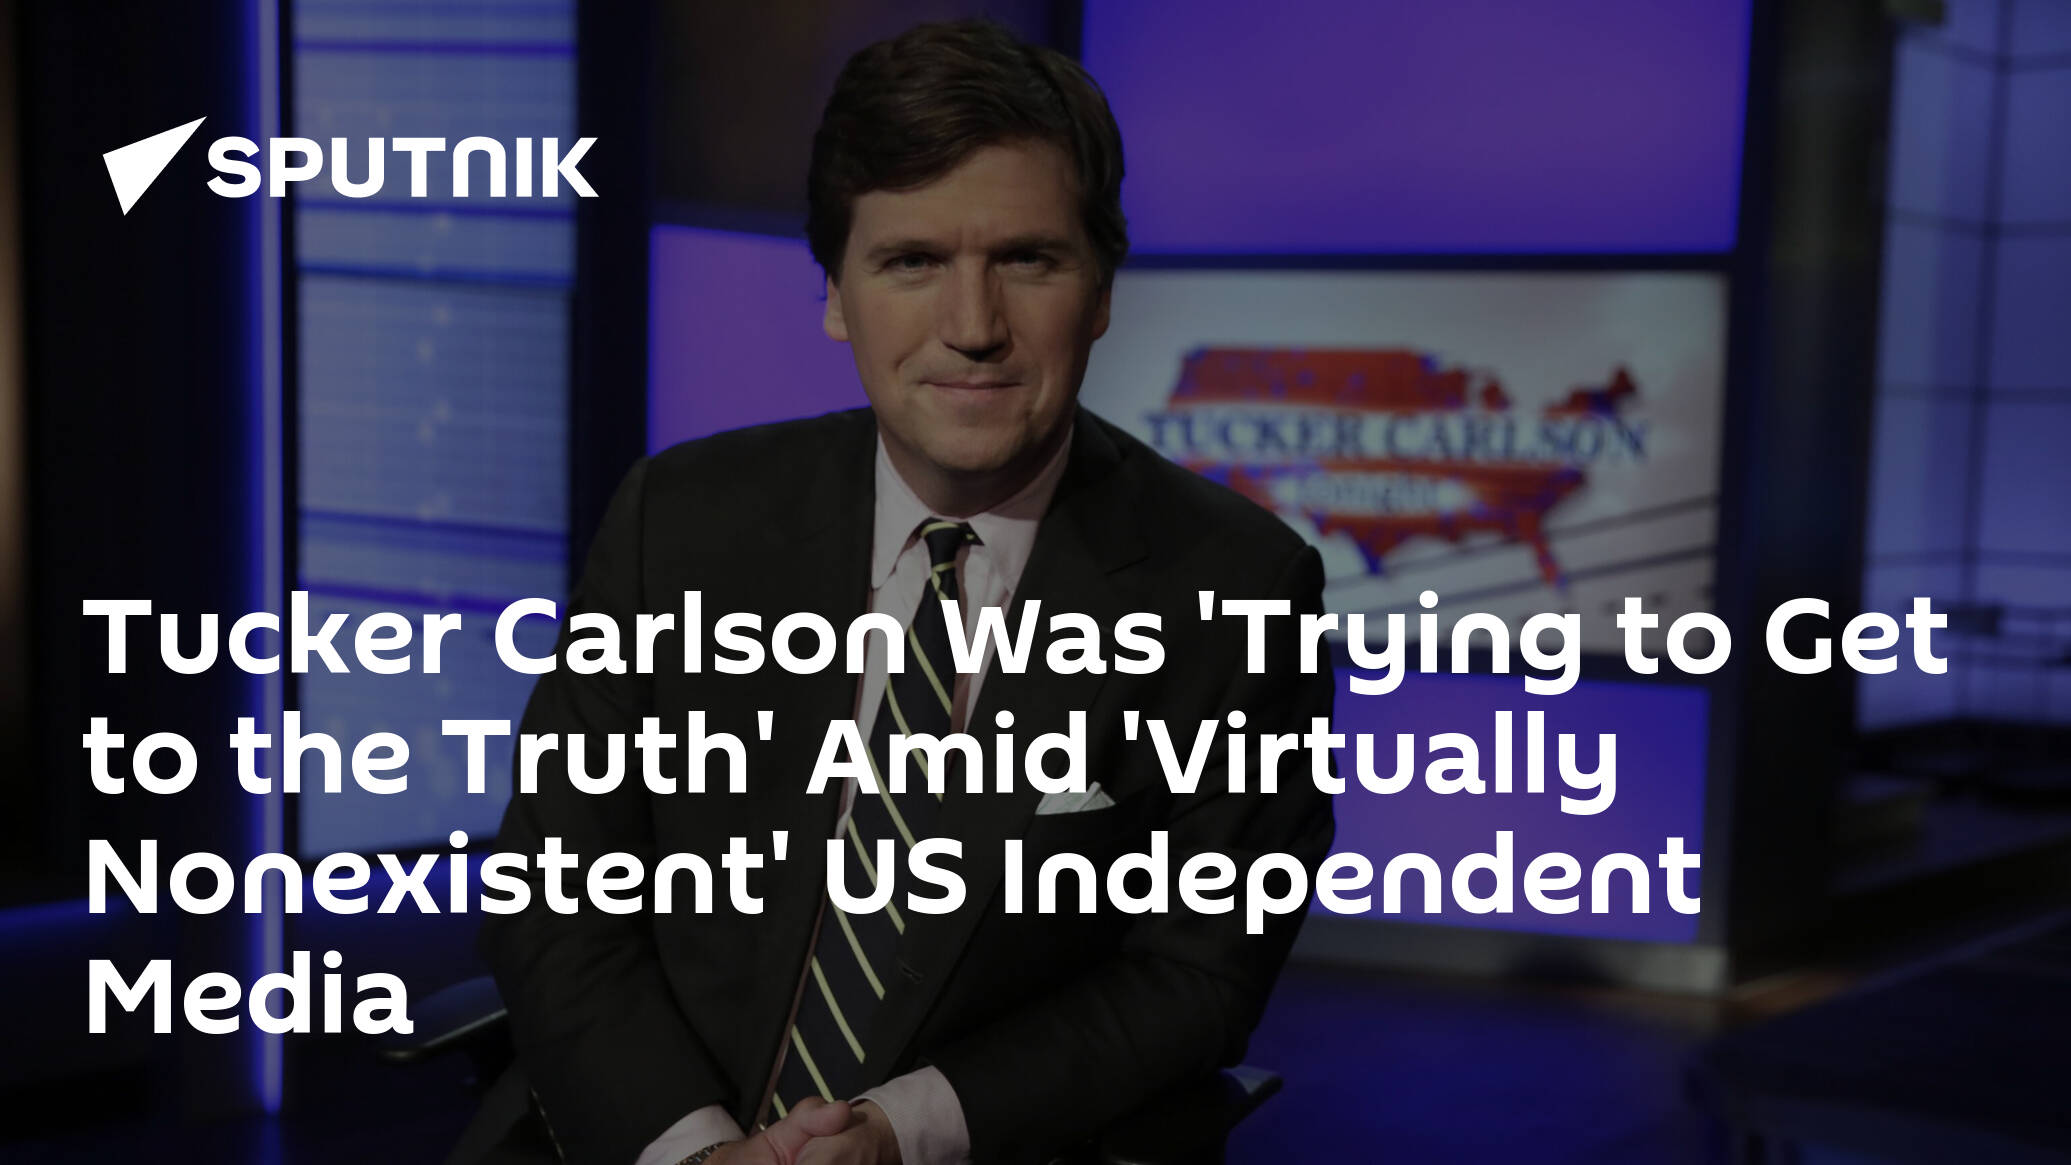 Tucker Carlson Was 'Trying to Get to the Truth' Amid 'Virtually Nonexistent' US Independent Media